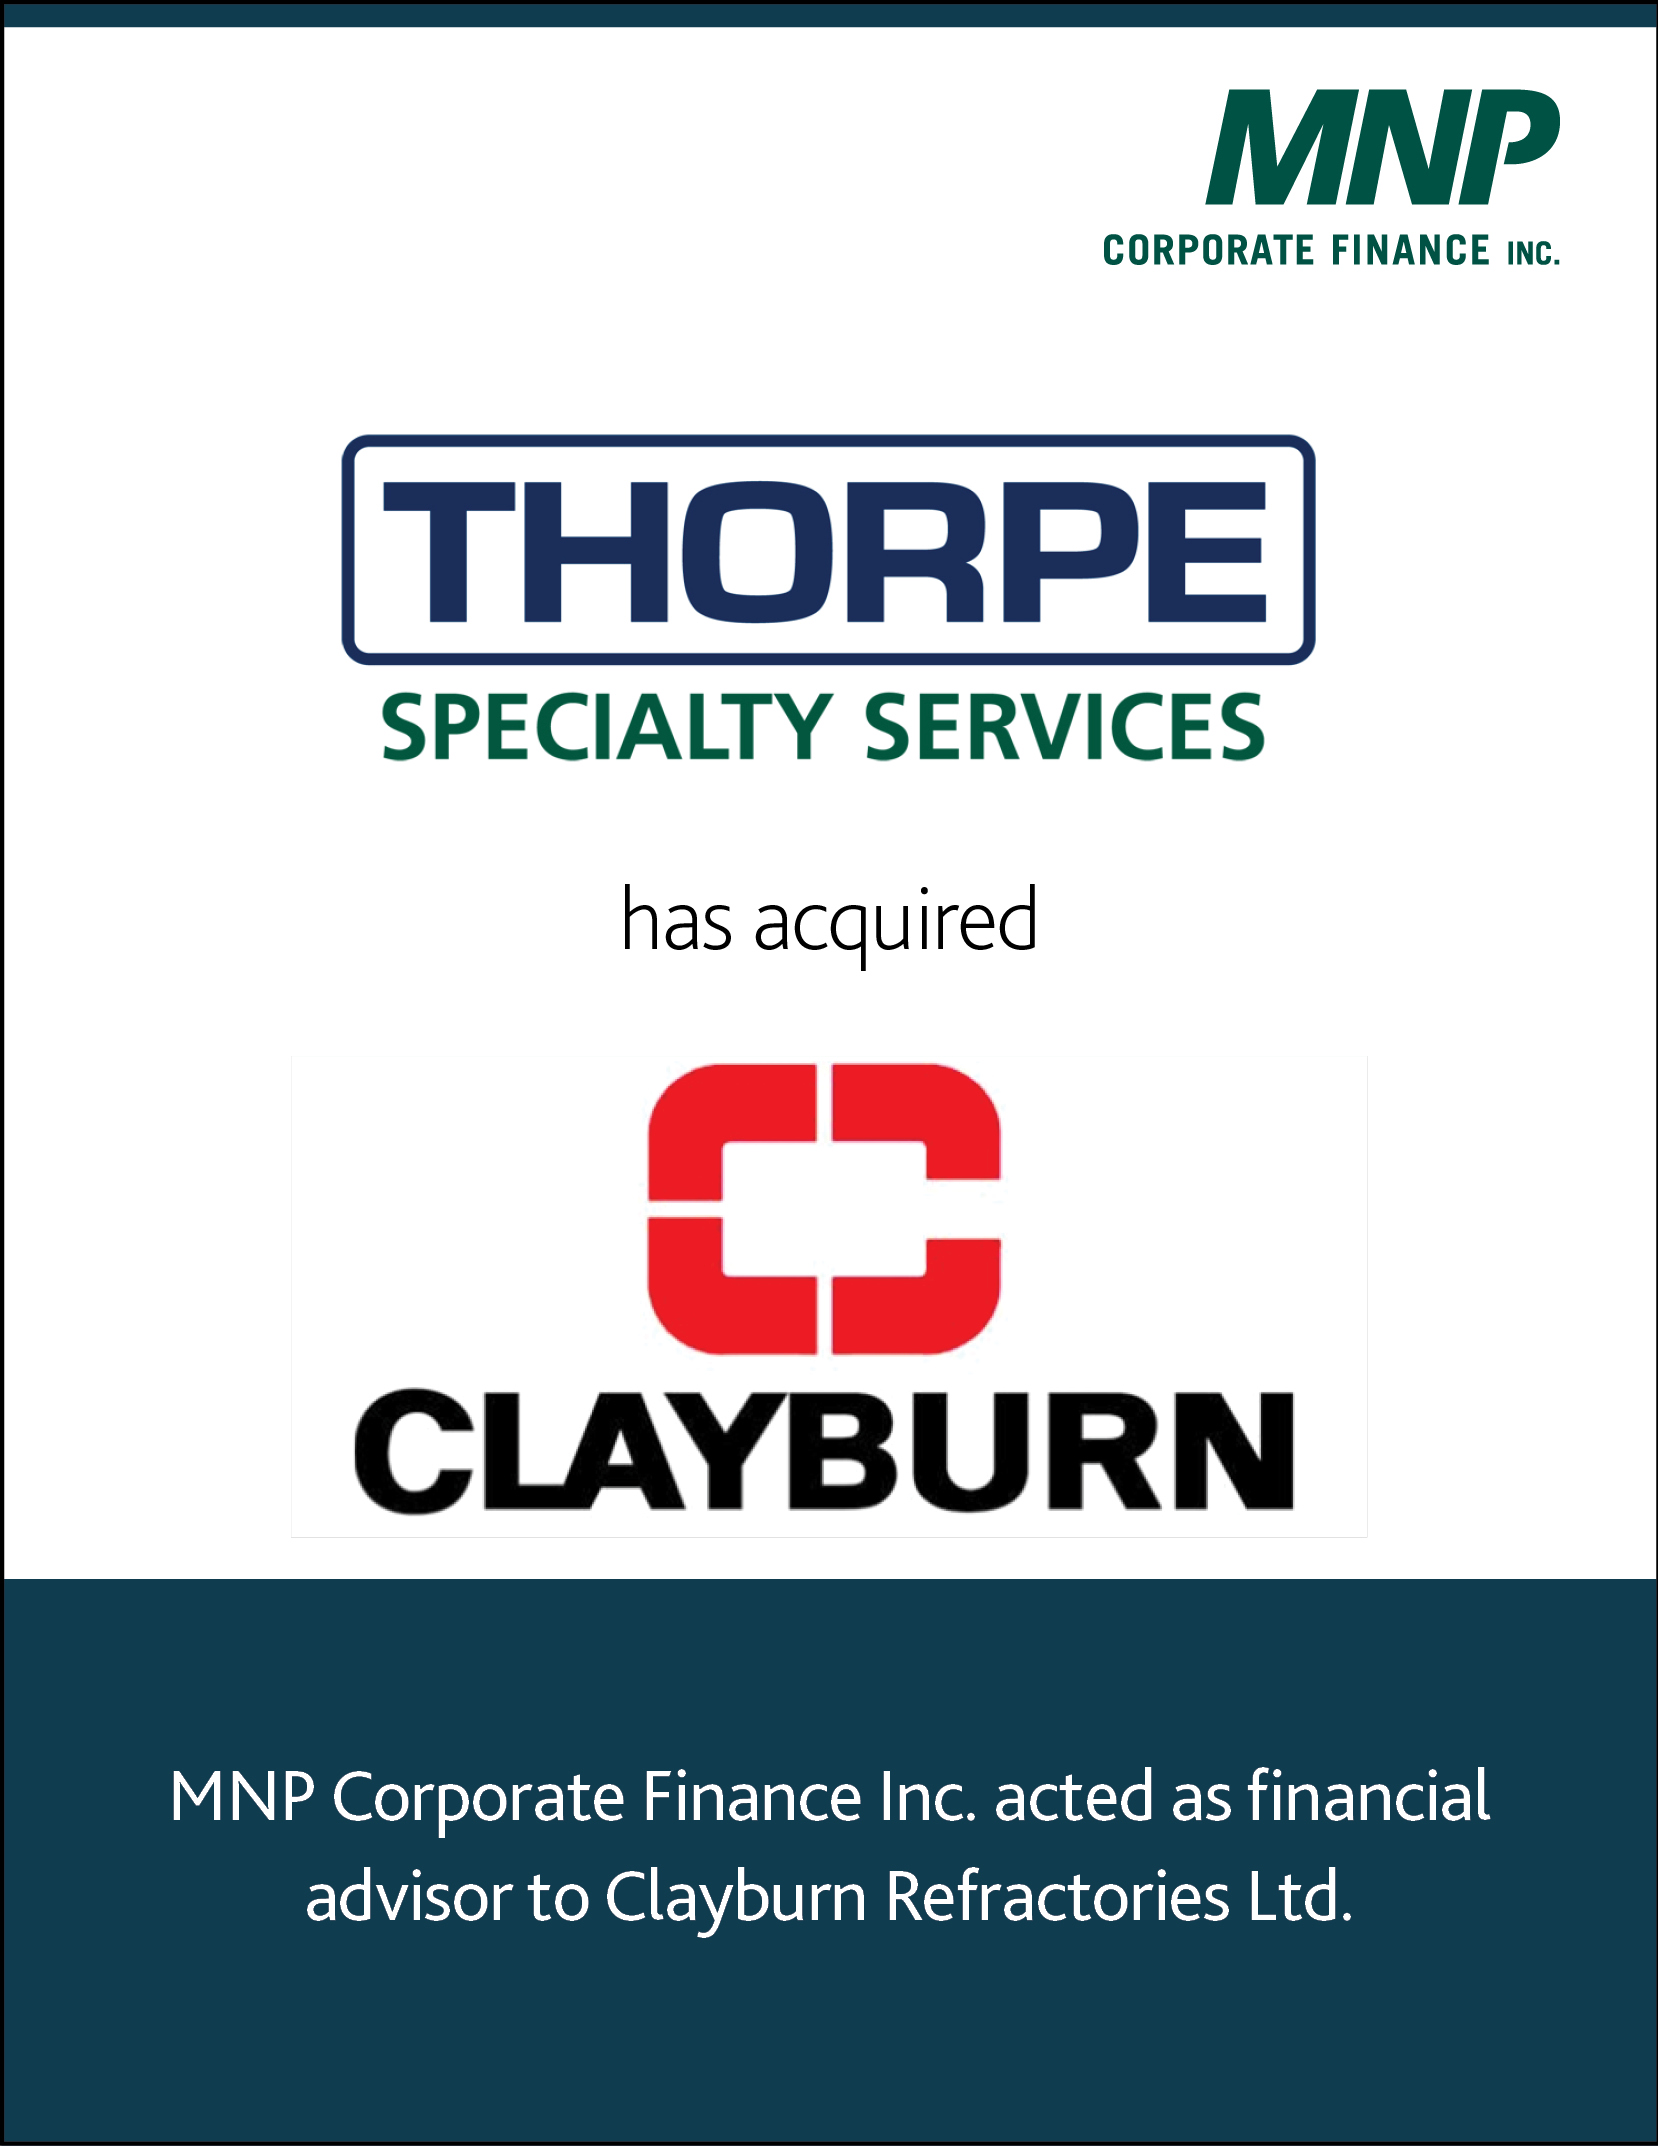 Thorpe Specialty Services has acquired Clayburn. 